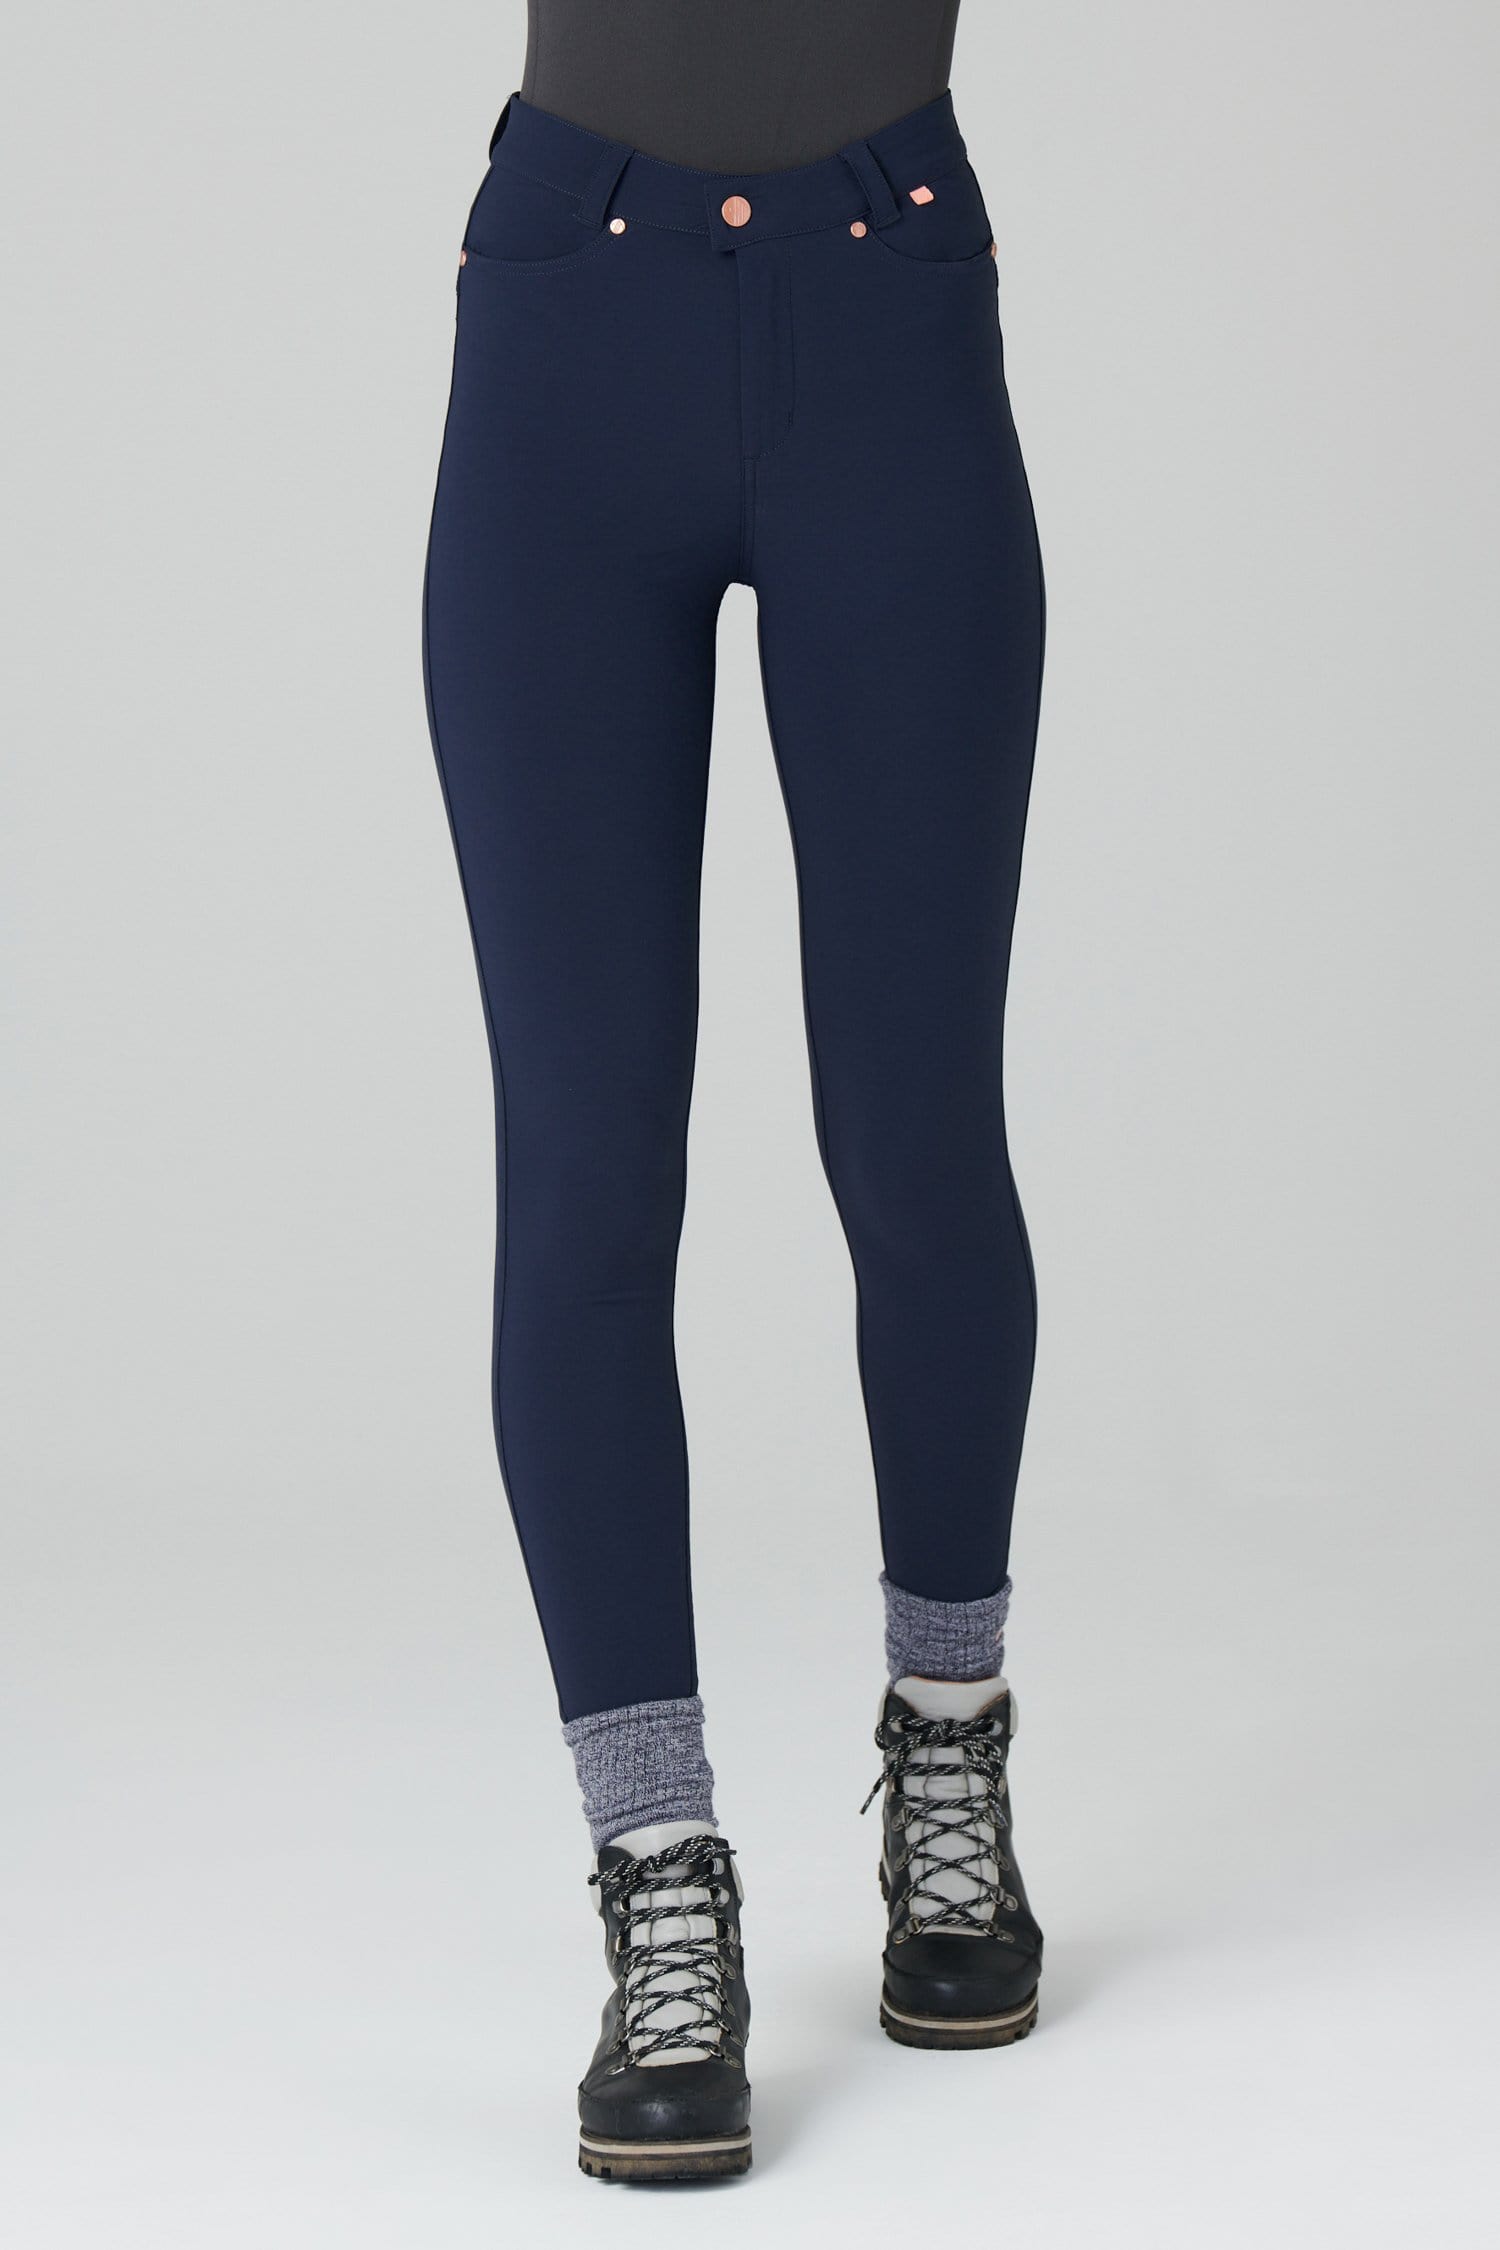 Max Stretch Skinny Outdoor Trousers - Deep Navy - 40l / Uk22 - Womens - Acai Outdoorwear